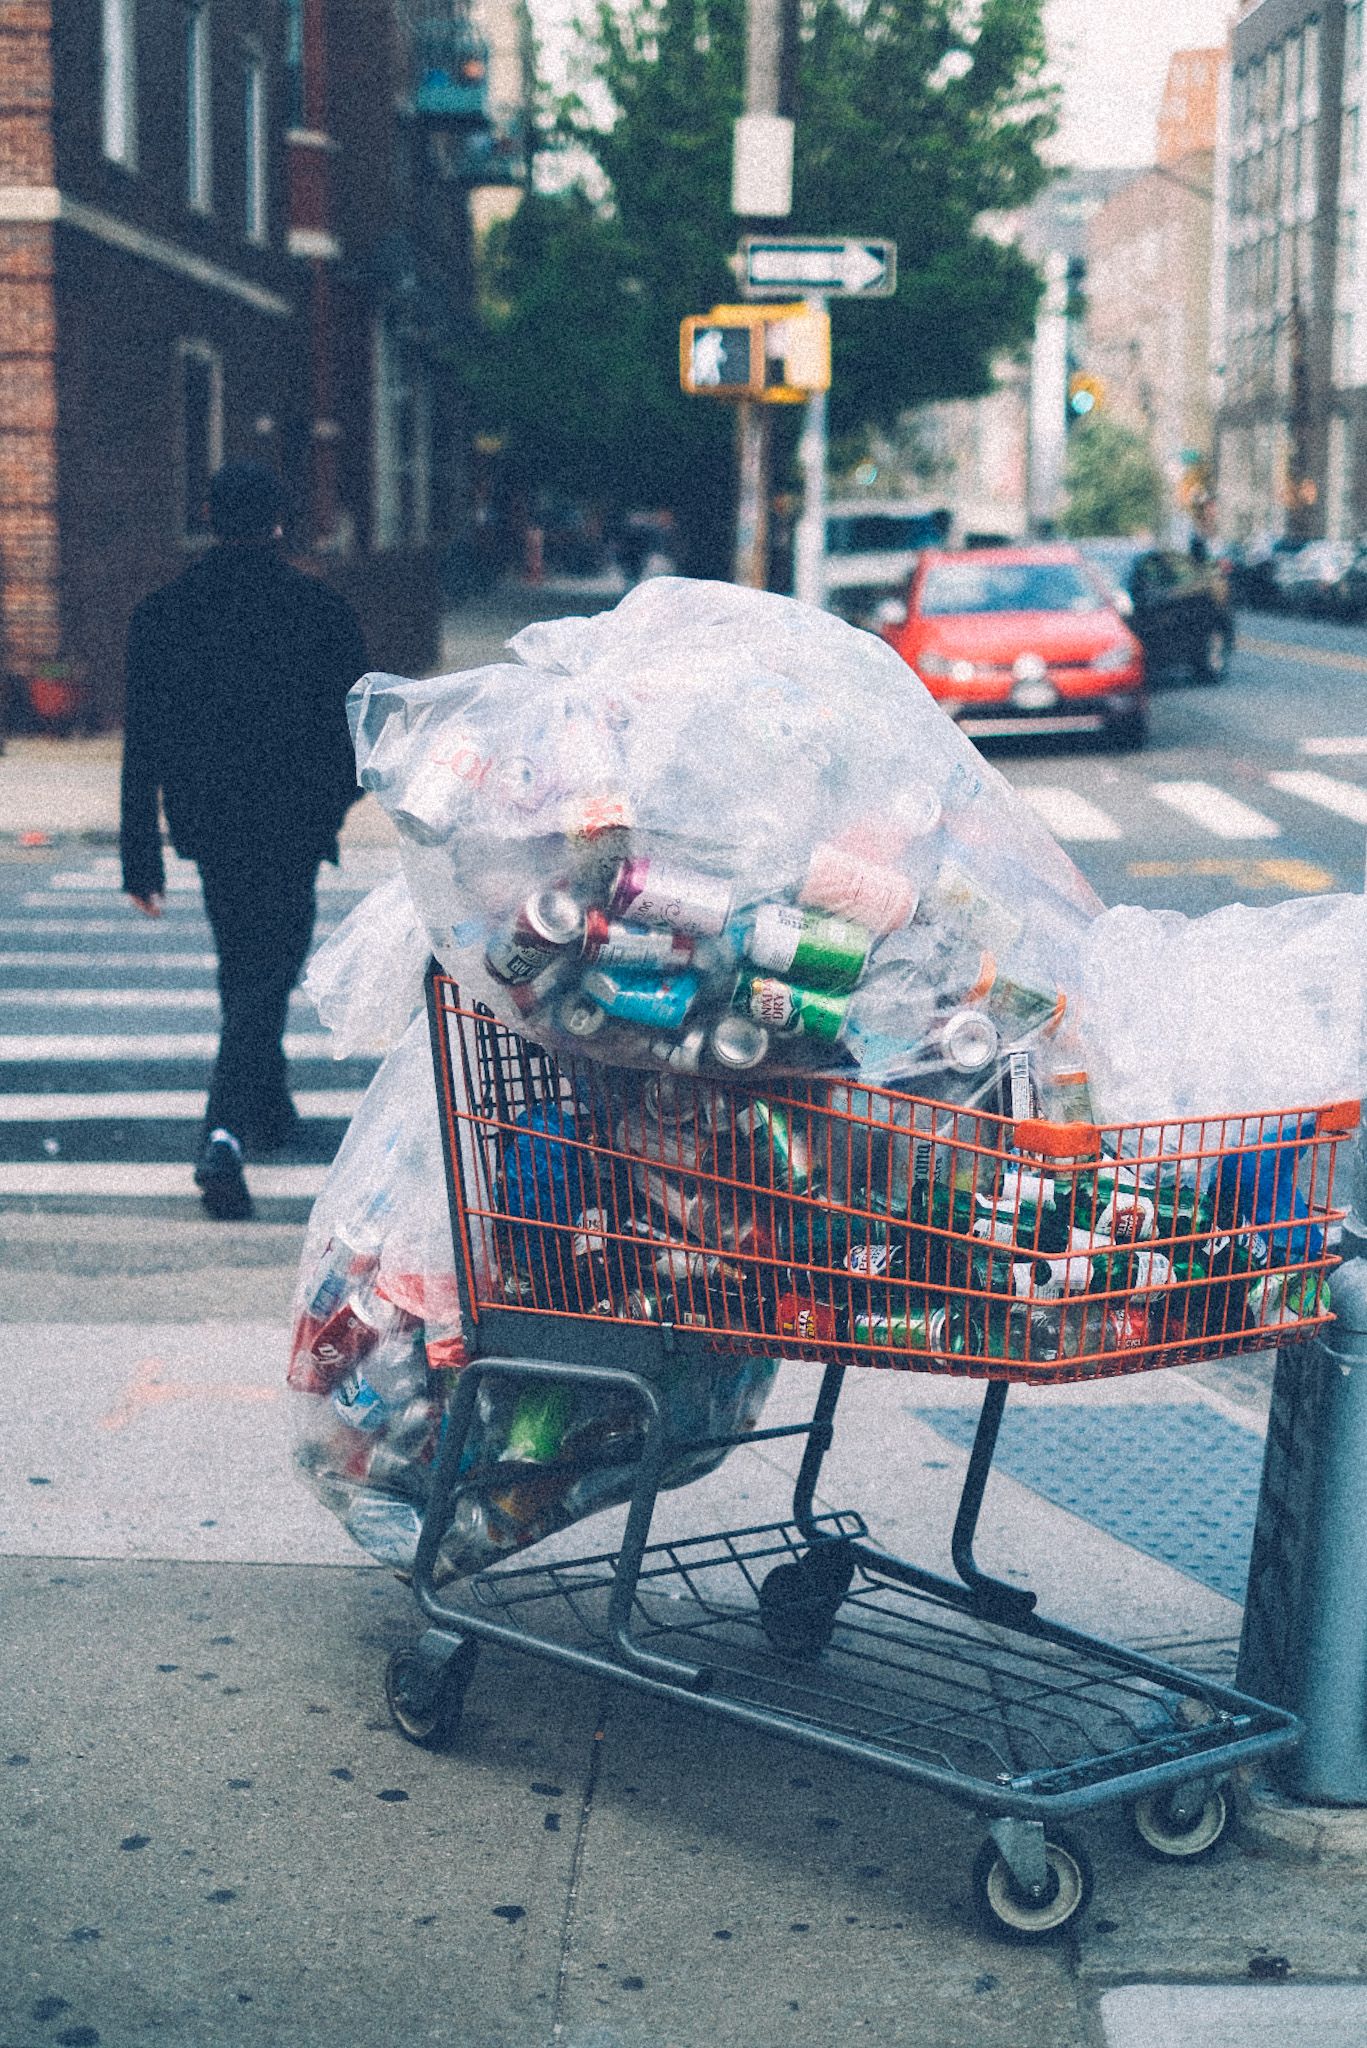 A man in the background walks past a shopping cart full of recycled soda cans on the corner of a sidewalk.